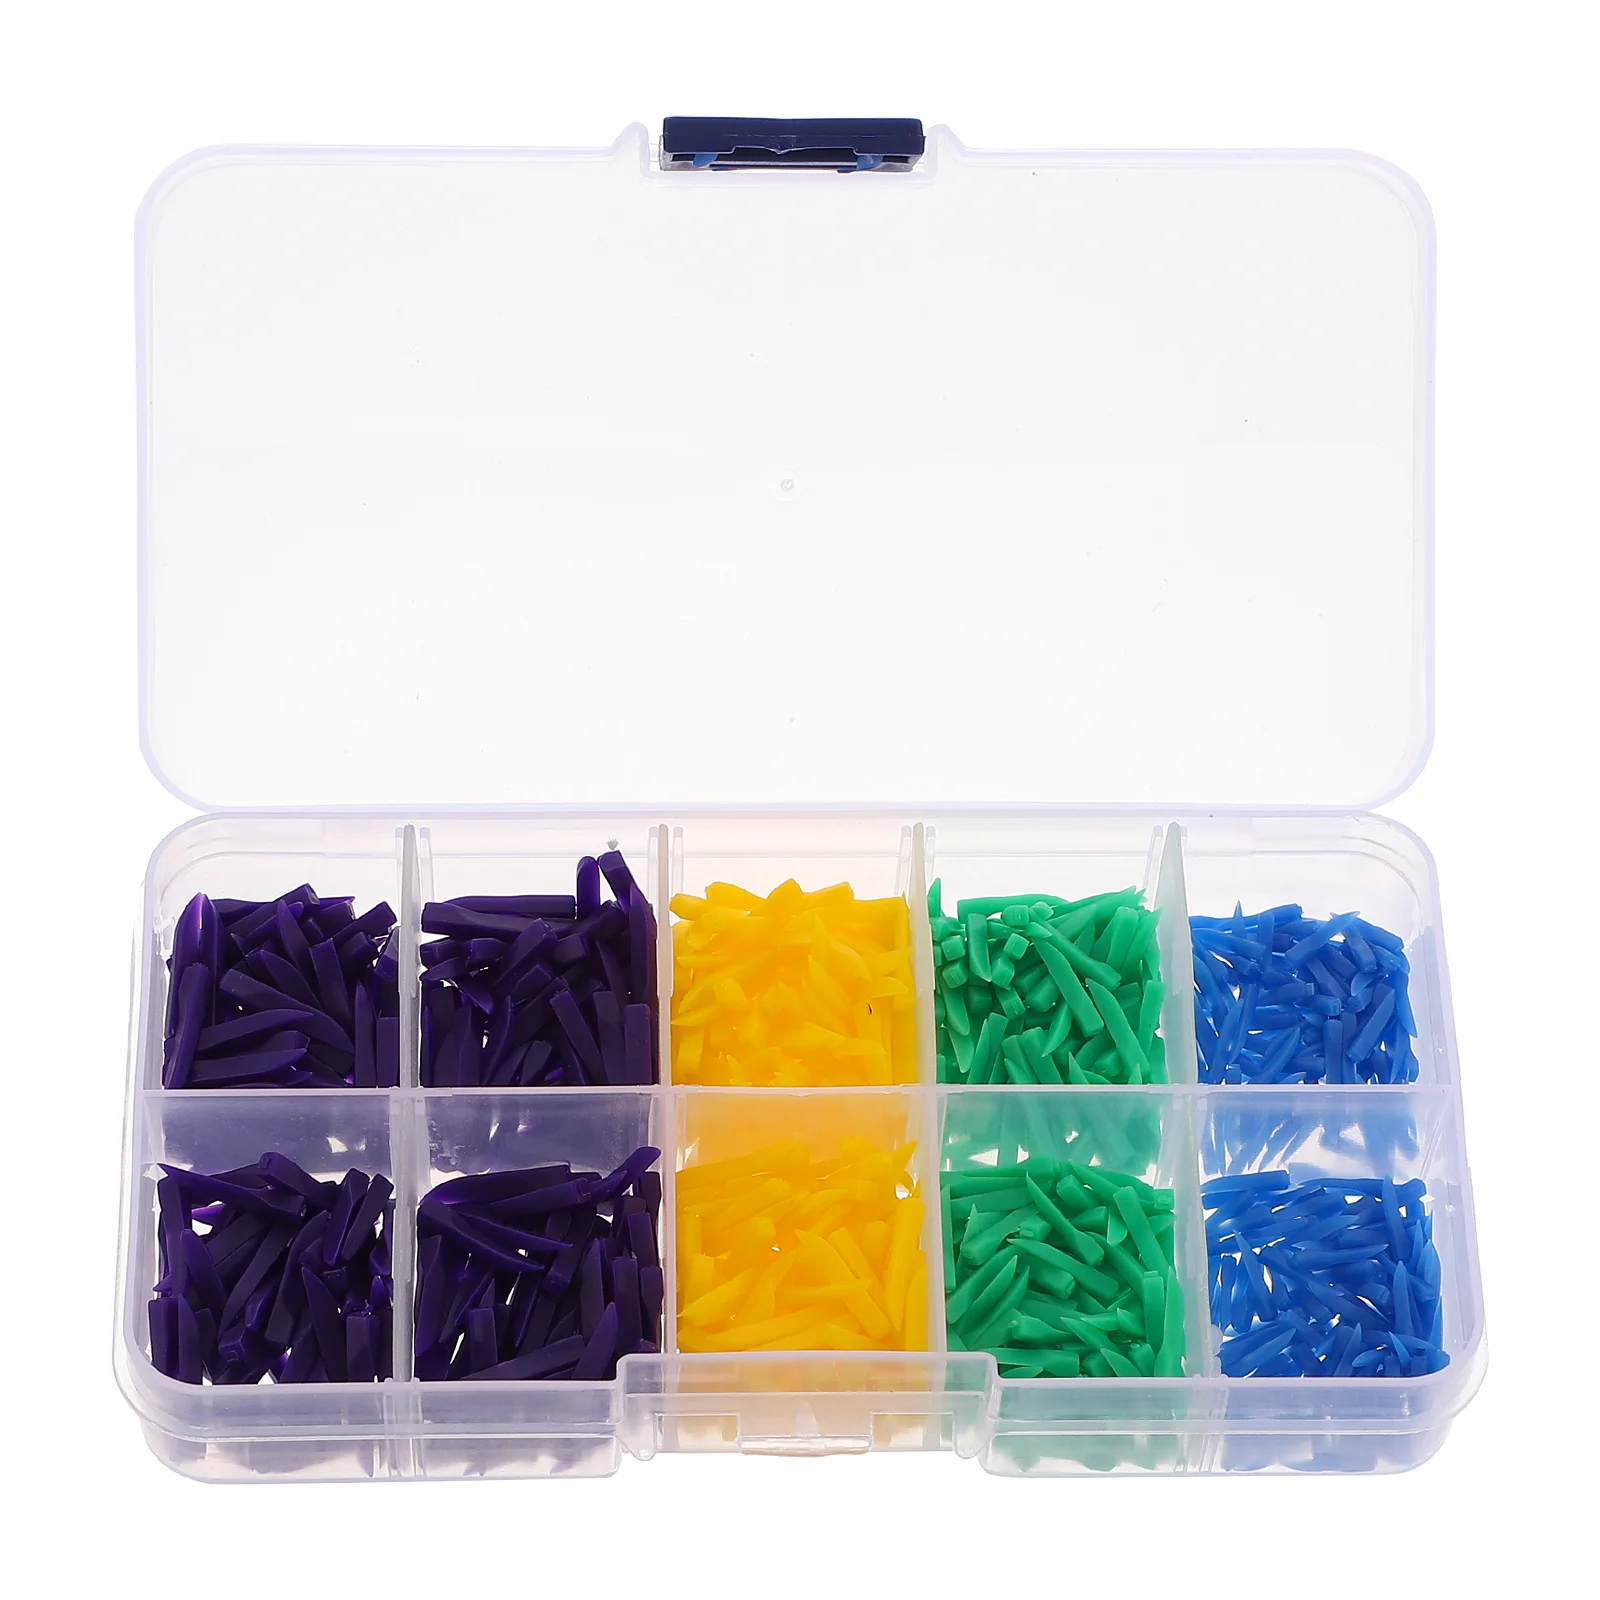 

800Pcs Wedges Color Filling Dentistry Composite Dentistry Tool Box Wedges Teeth Fixing Retainer